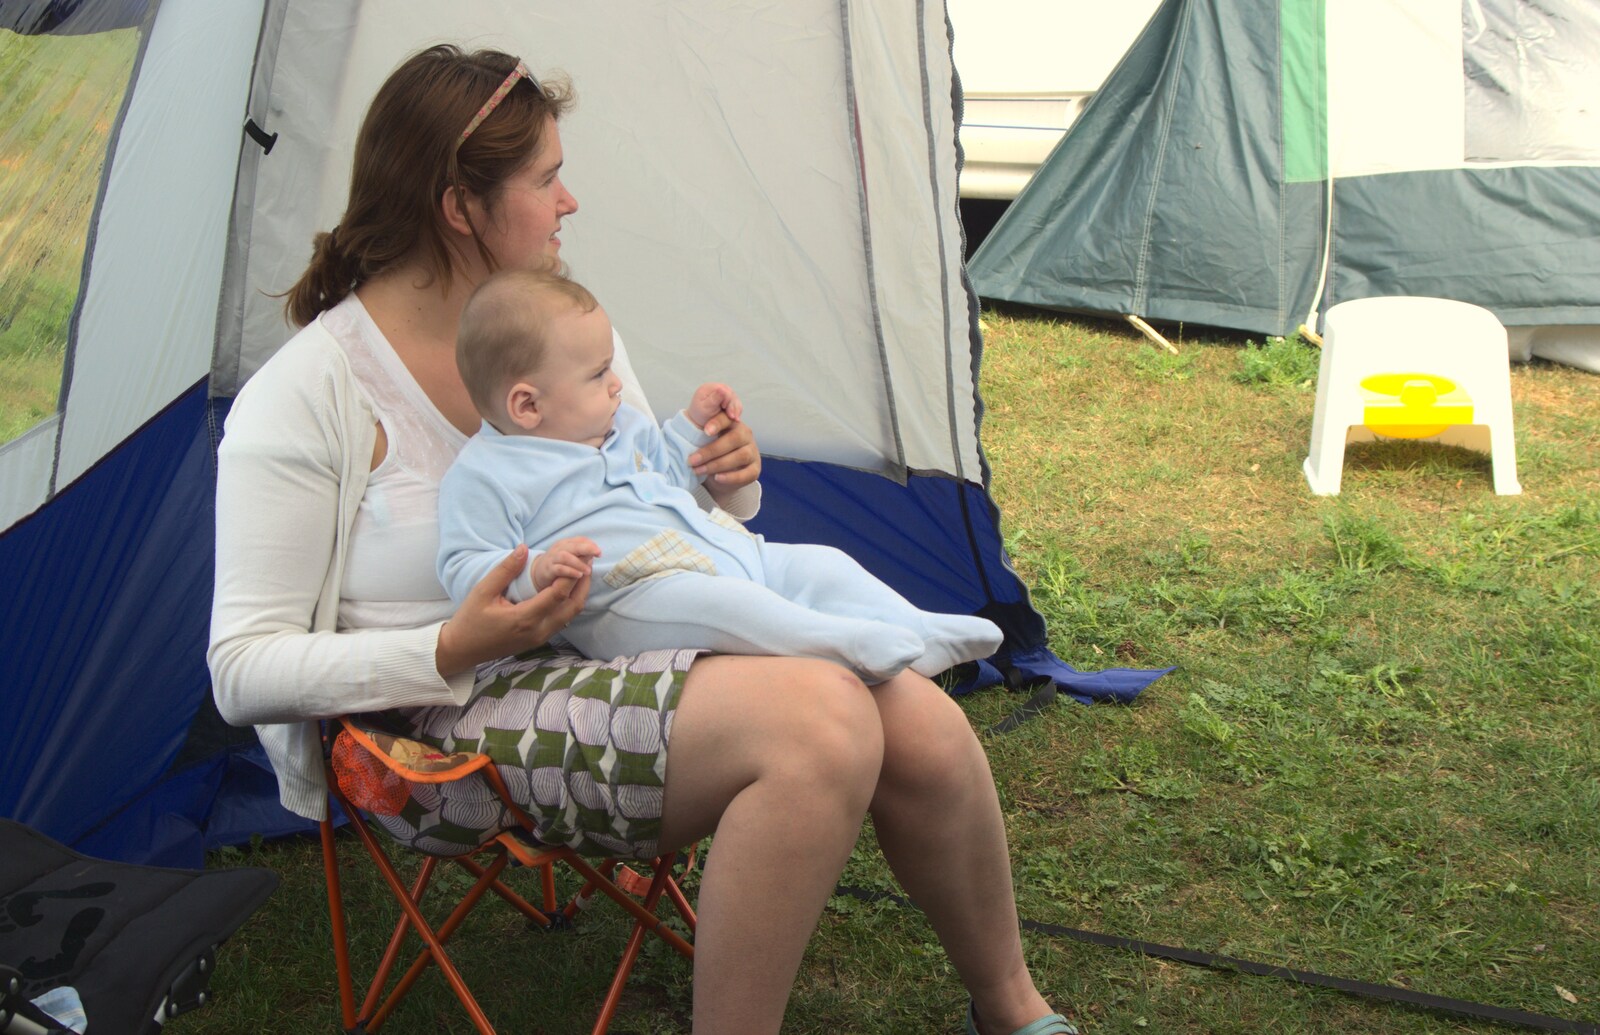 Isobel and the baby Thomas from Carlton Park Camping, Saxmundham, Suffolk - 4th June 2011